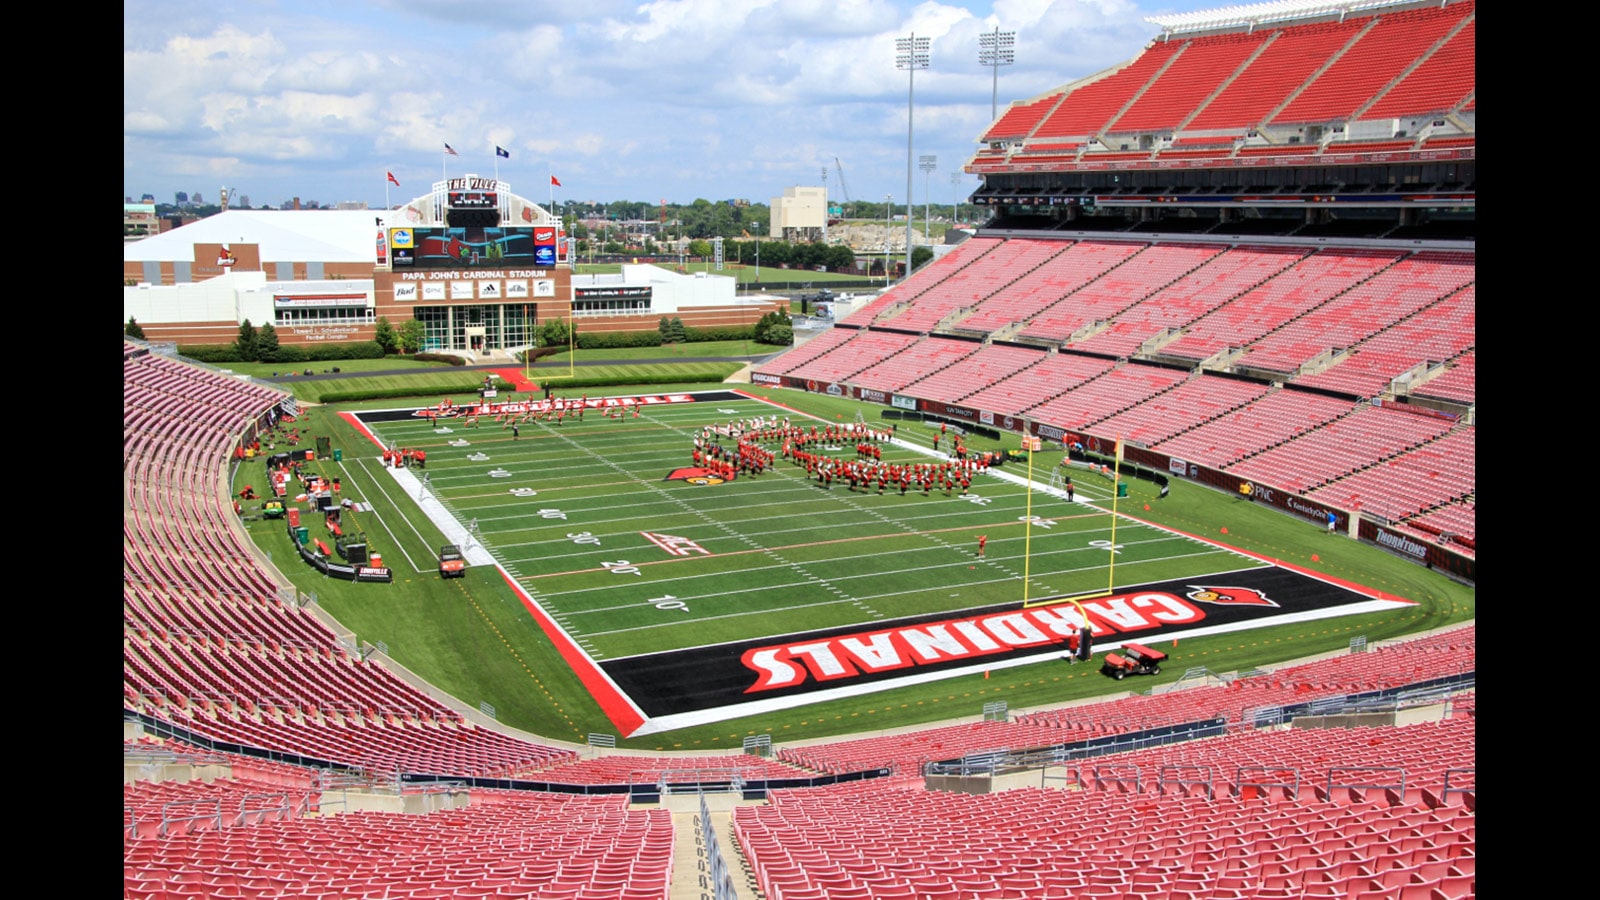 Louisville Football Stadium Delivers High-Impact Game Experience with Meyer Sound LEO